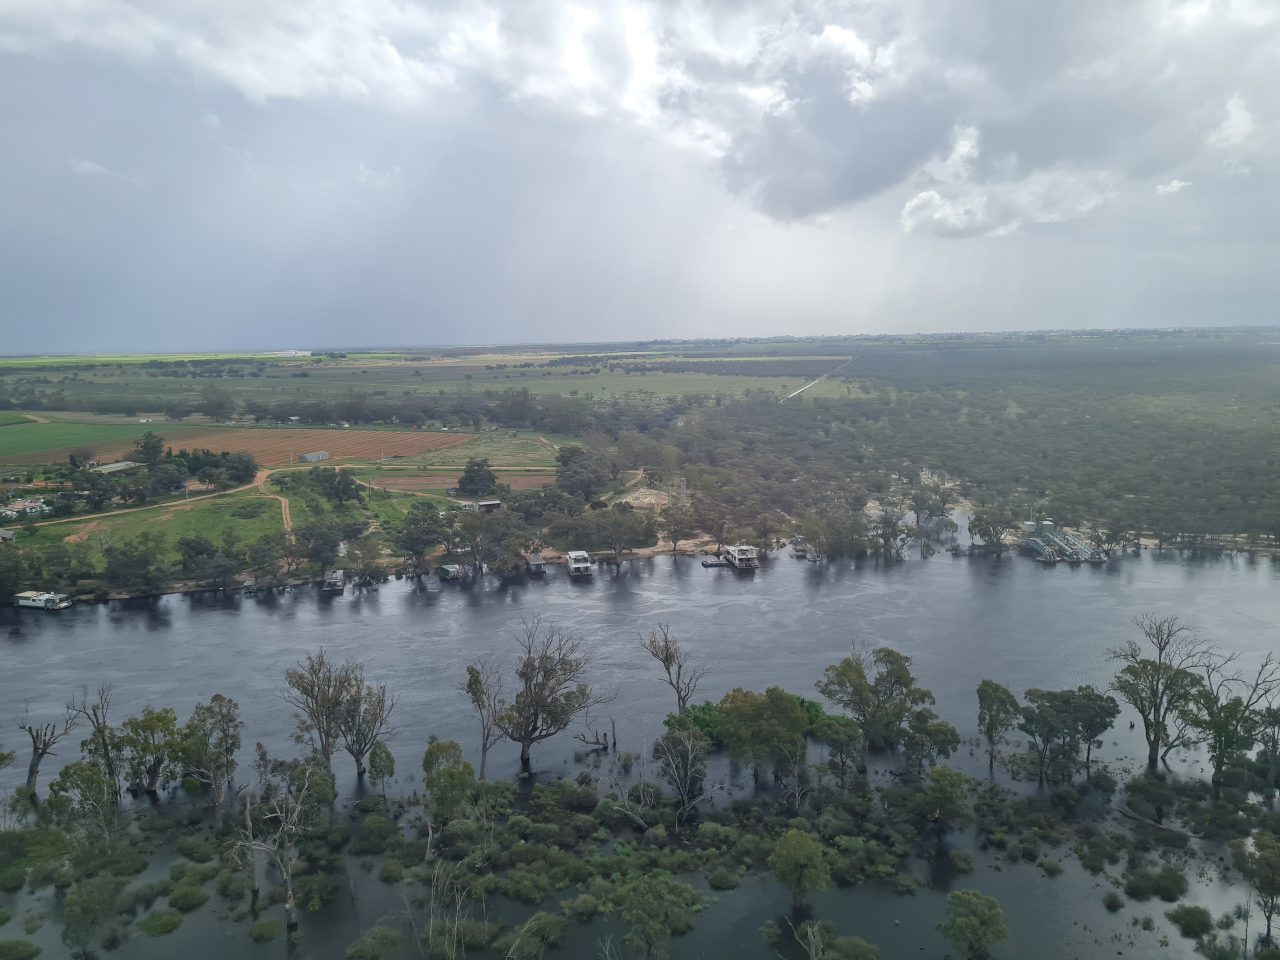 Aerial photo of a wide very full running river. The water is escaping the banks and inundating the surrounding floodplain. There are houseboats moored on the banks.  Farming paddocks and som patches of trees cover the floodplain. There is a dirt road with a house and other farm bulidings by the road. Sun is beginning to break through a cloudy sky.